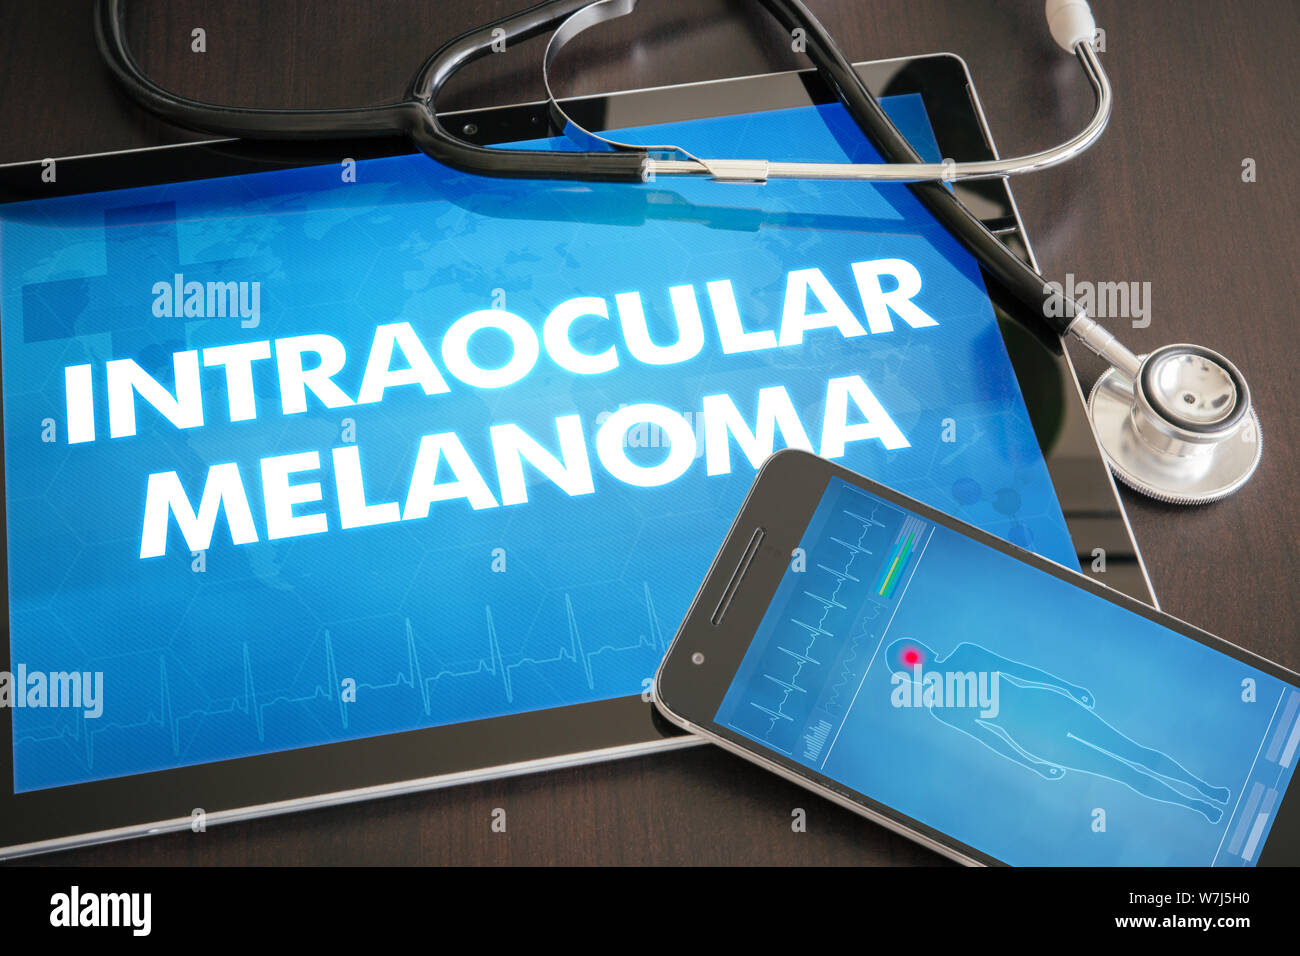 Intraocular melanoma (cancer type) diagnosis medical concept on tablet screen with stethoscope. Stock Photo